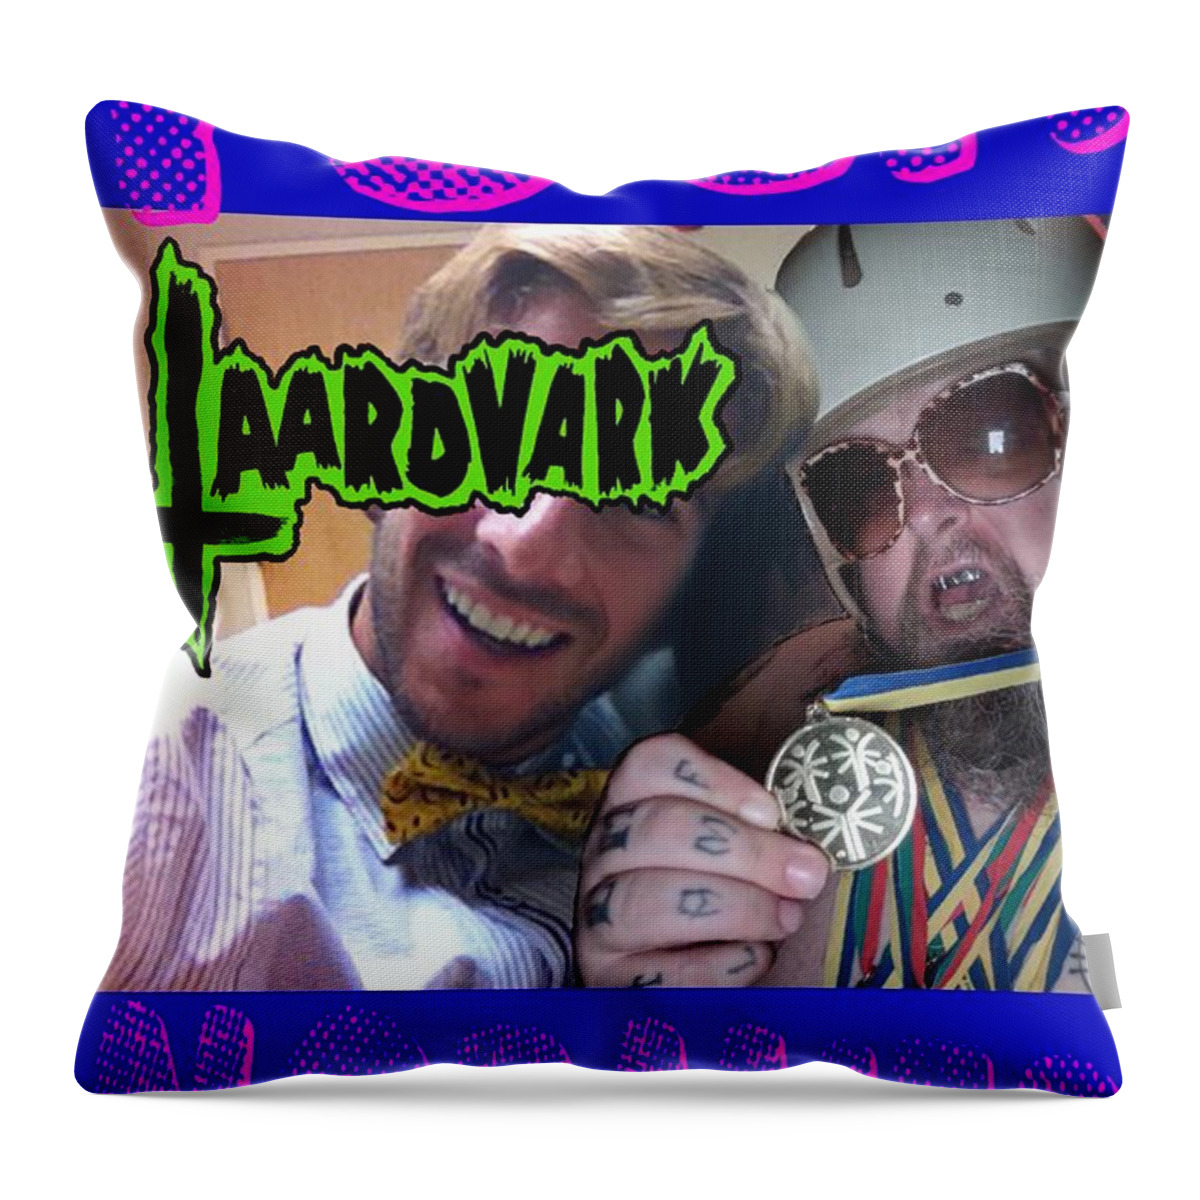 Ryan Almighty Throw Pillow featuring the digital art Taardvark - Fuck Normies by Ryan Almighty